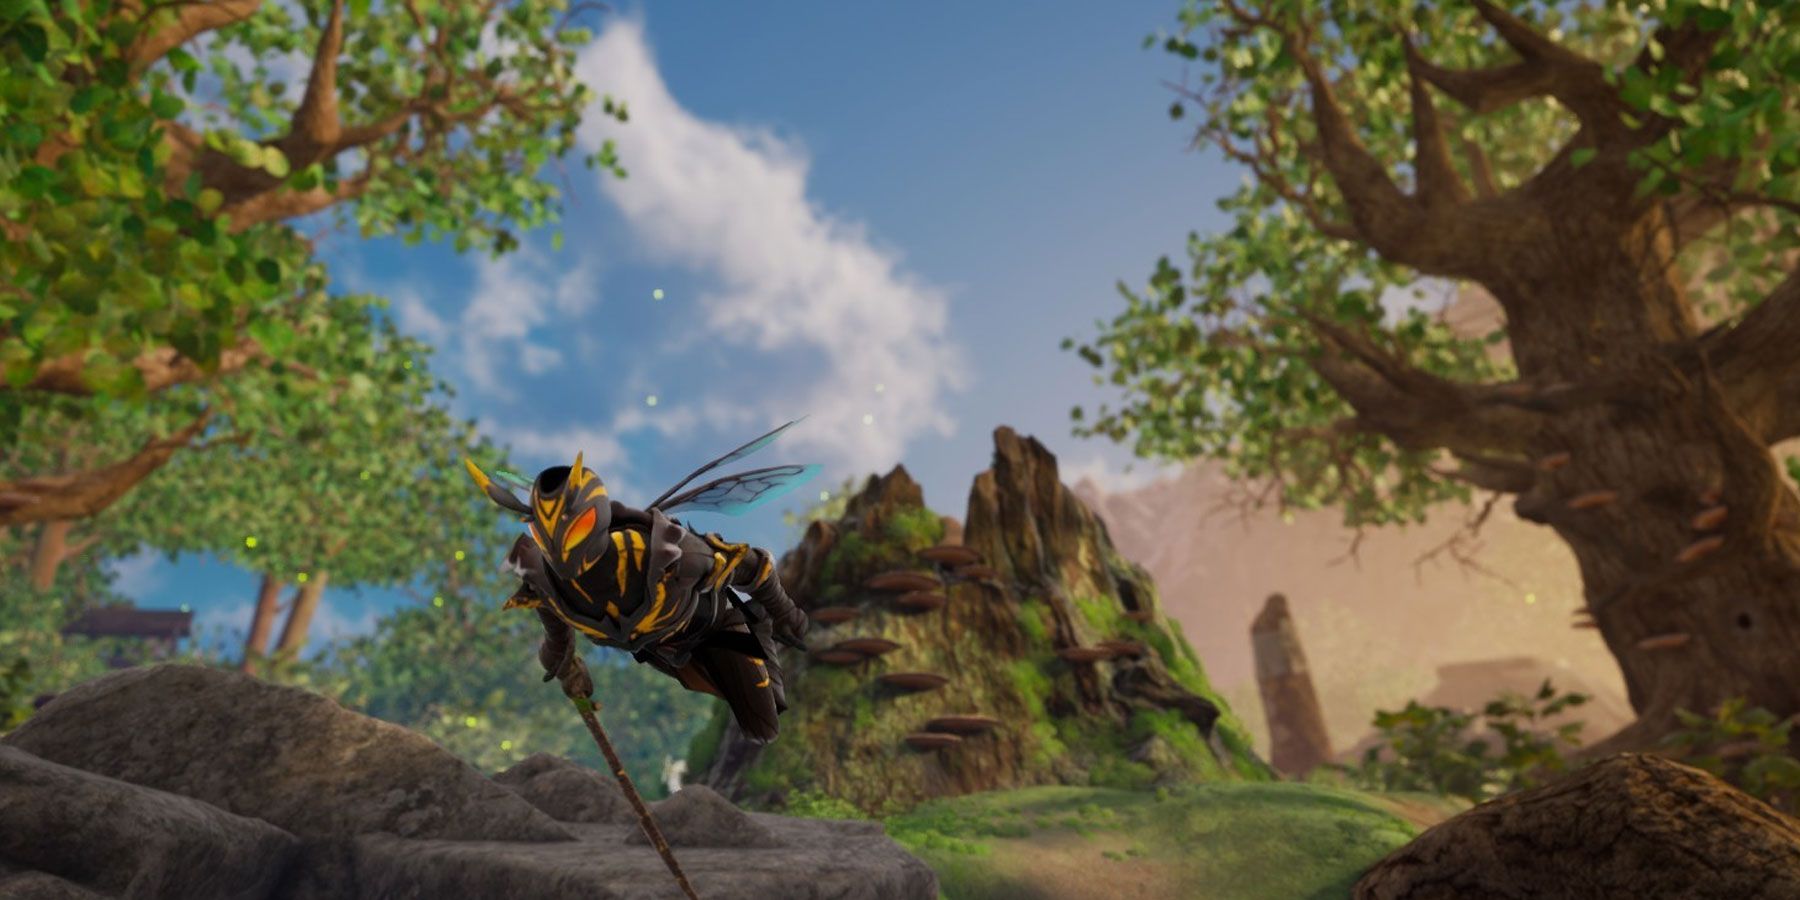 Tiny and character-in-bee armor that flies through the forest